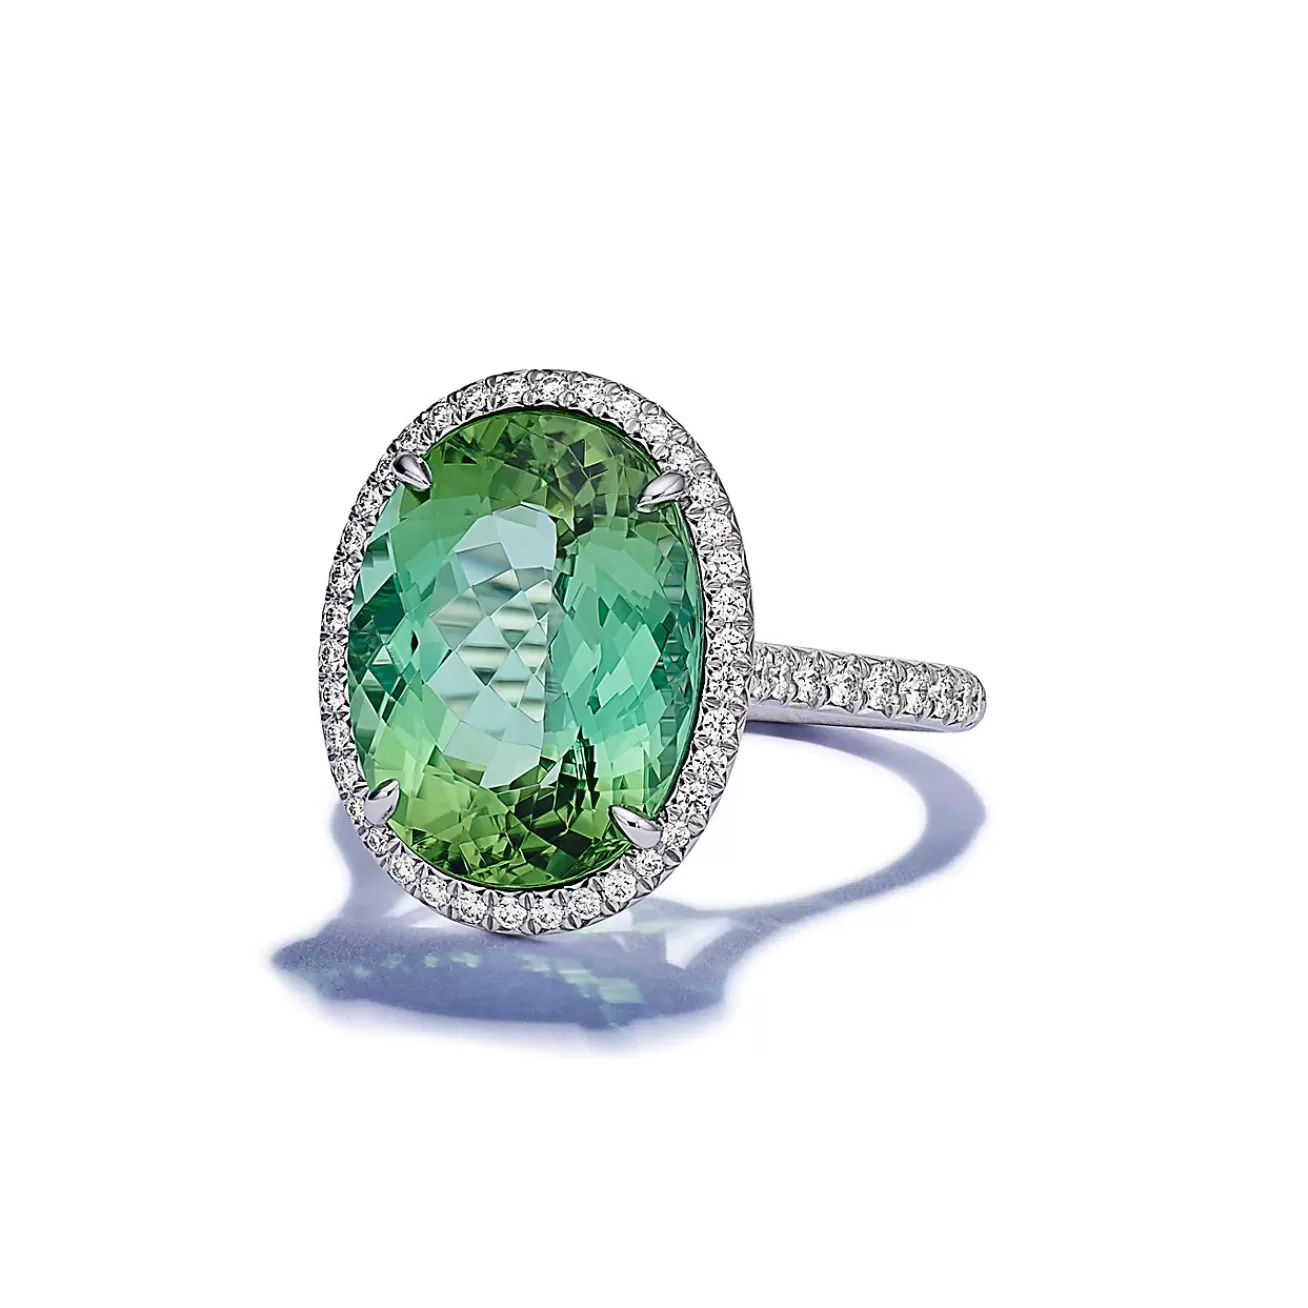 Tiffany & Co. Ring in Platinum with a Green Tourmaline and Diamonds | ^ Rings | Diamond Jewelry